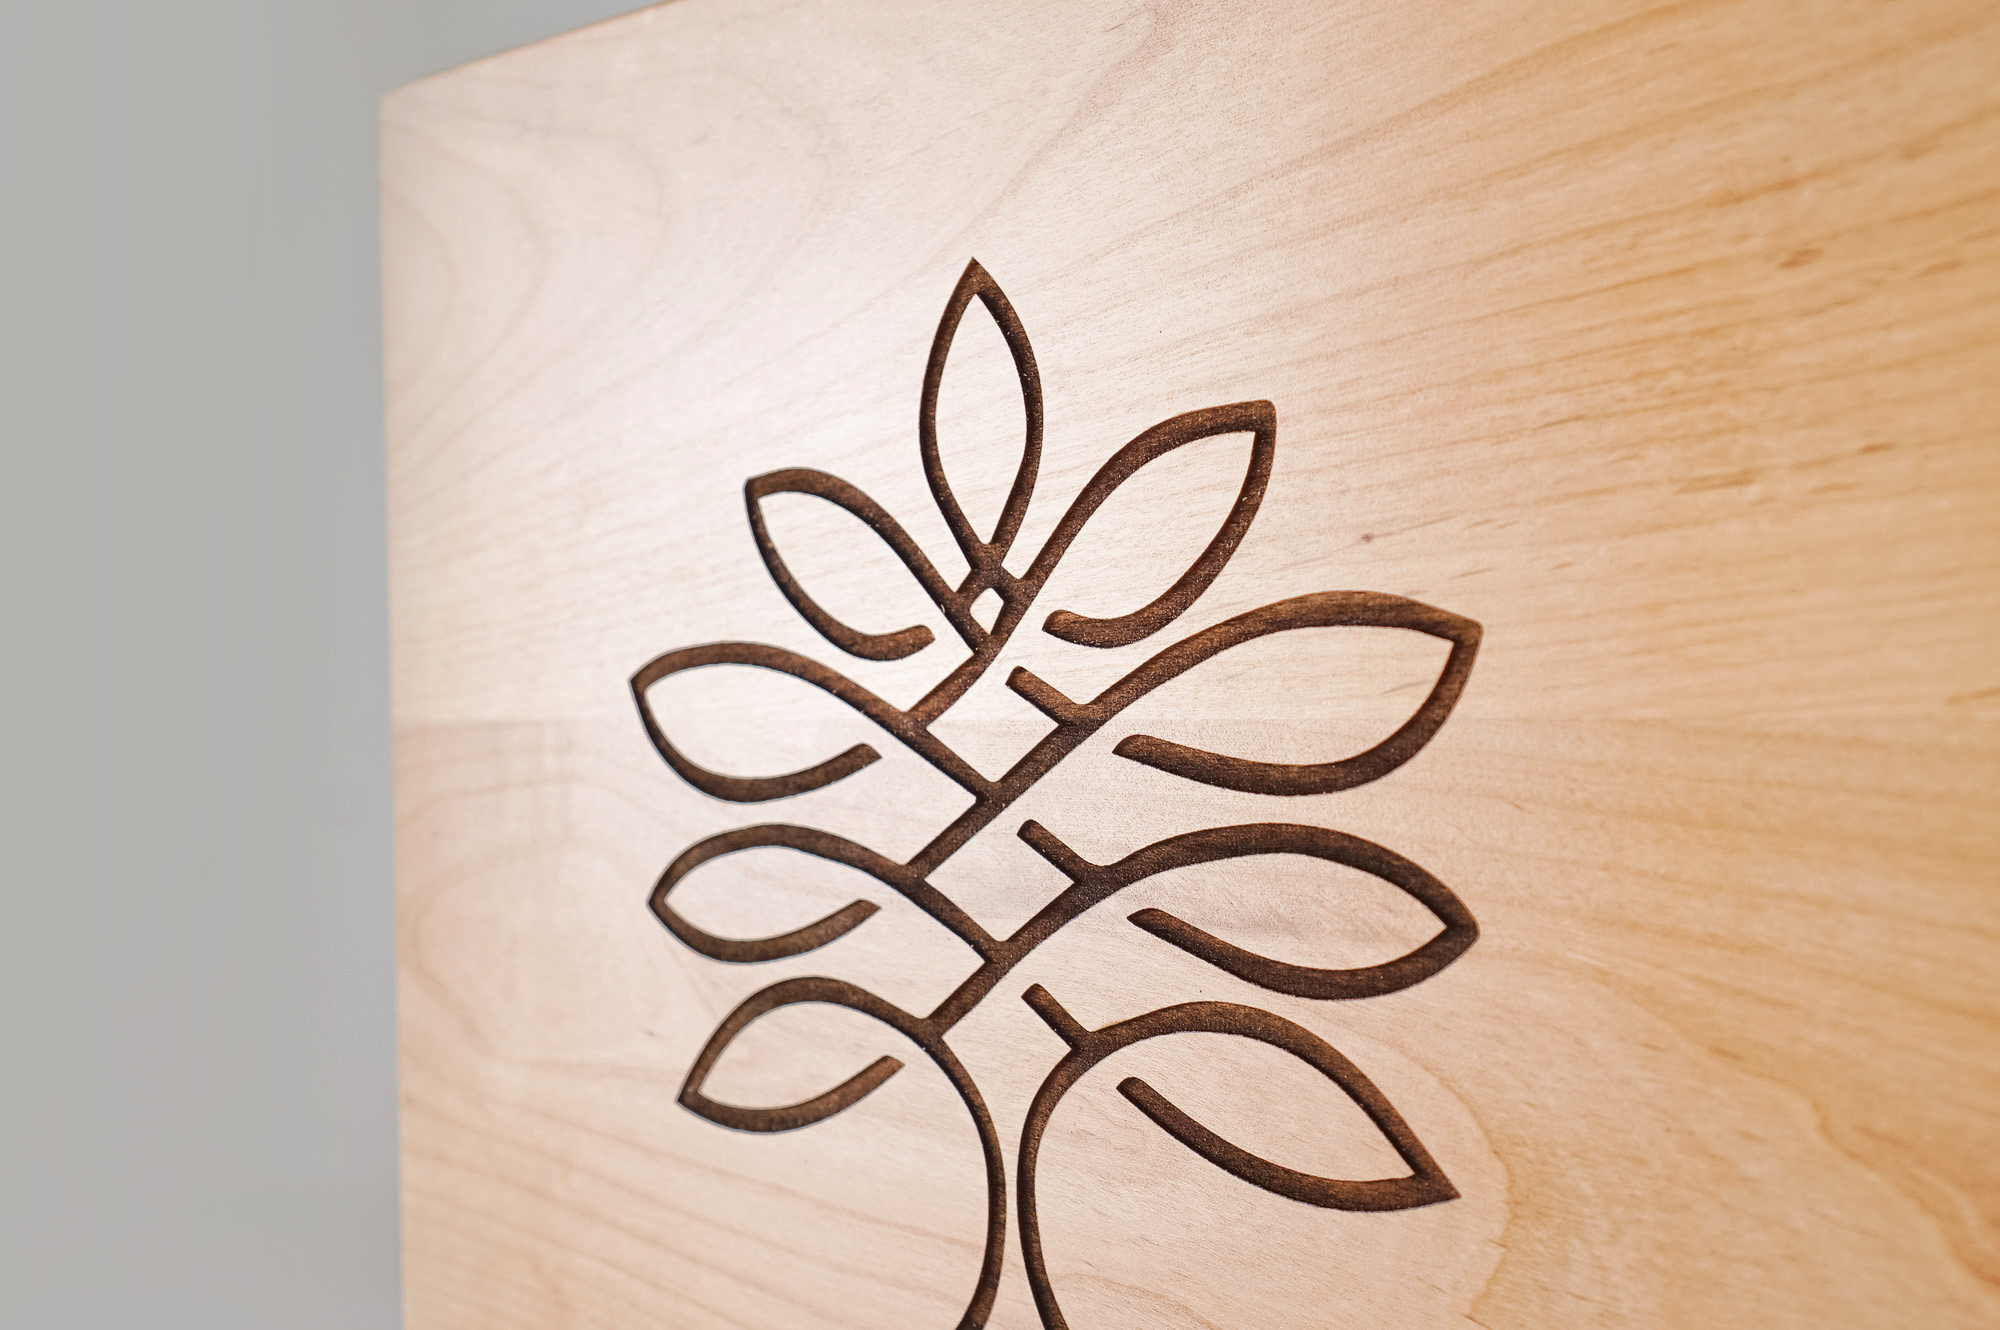 Etched light wood sign for Rosewood Family Advisors, a Palo Alto based company offering a diverse range of family office services.